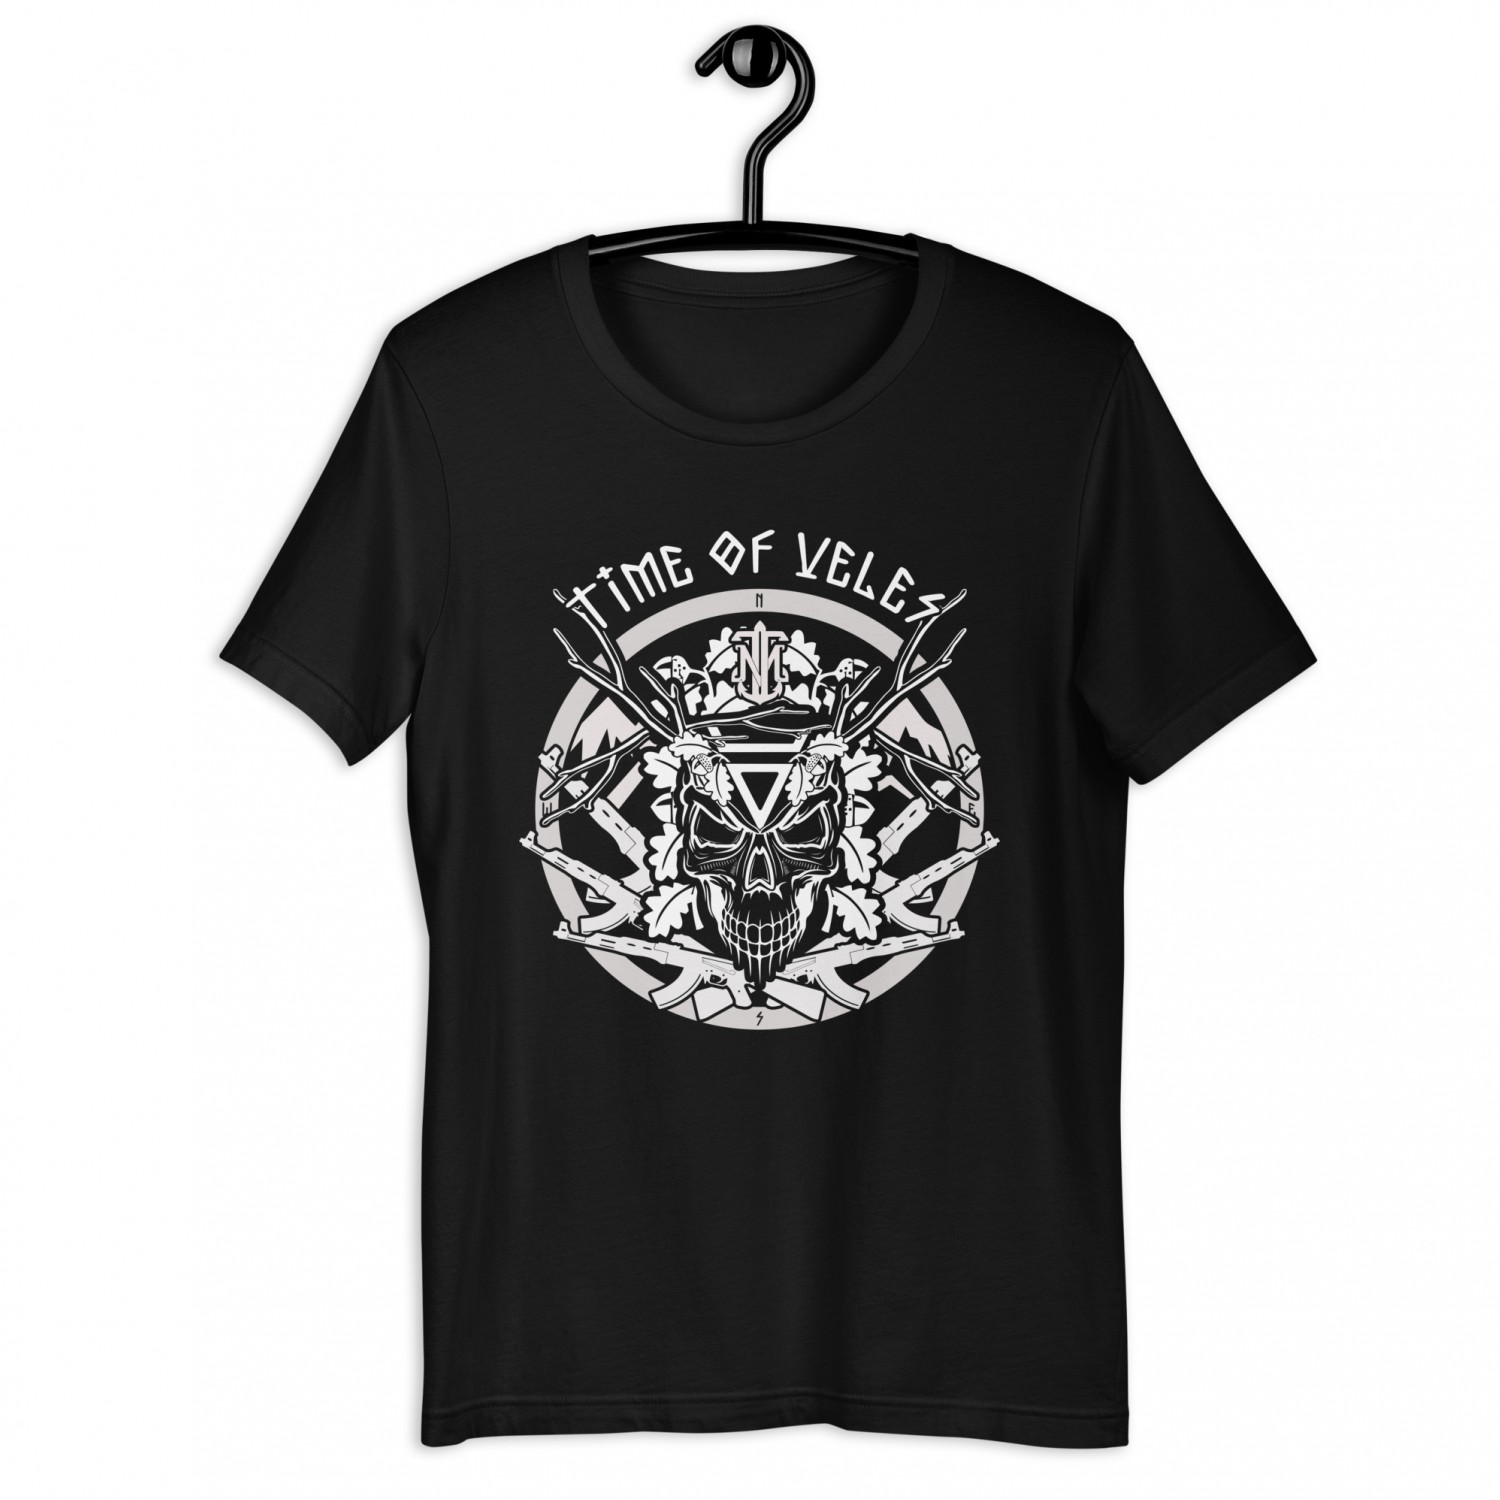 Buy a t-shirt - Time of Veles